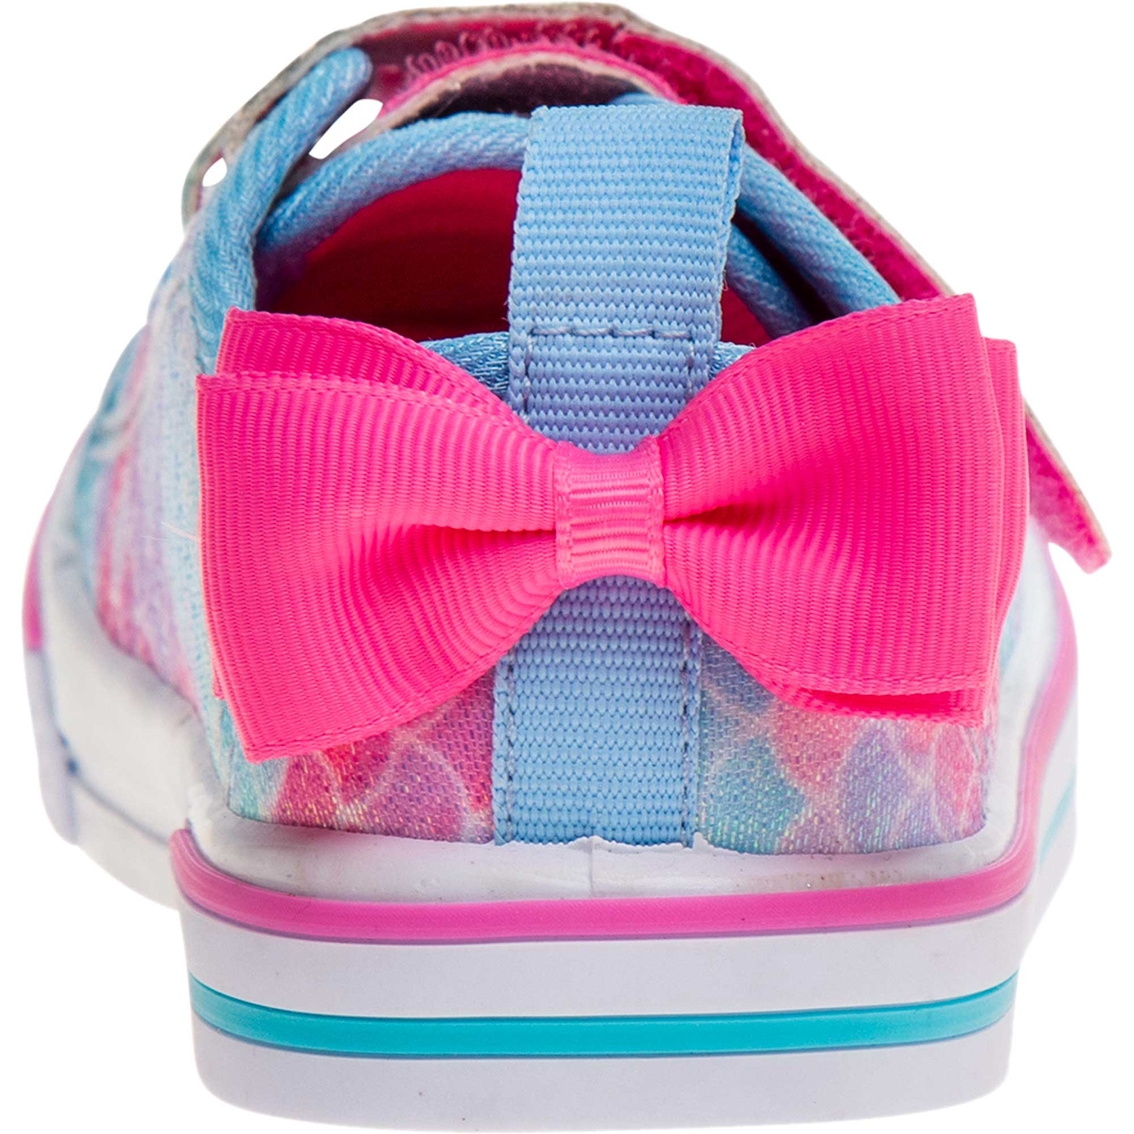 Laura Ashley Toddler Girls 2V Bow Sneakers - Image 2 of 5